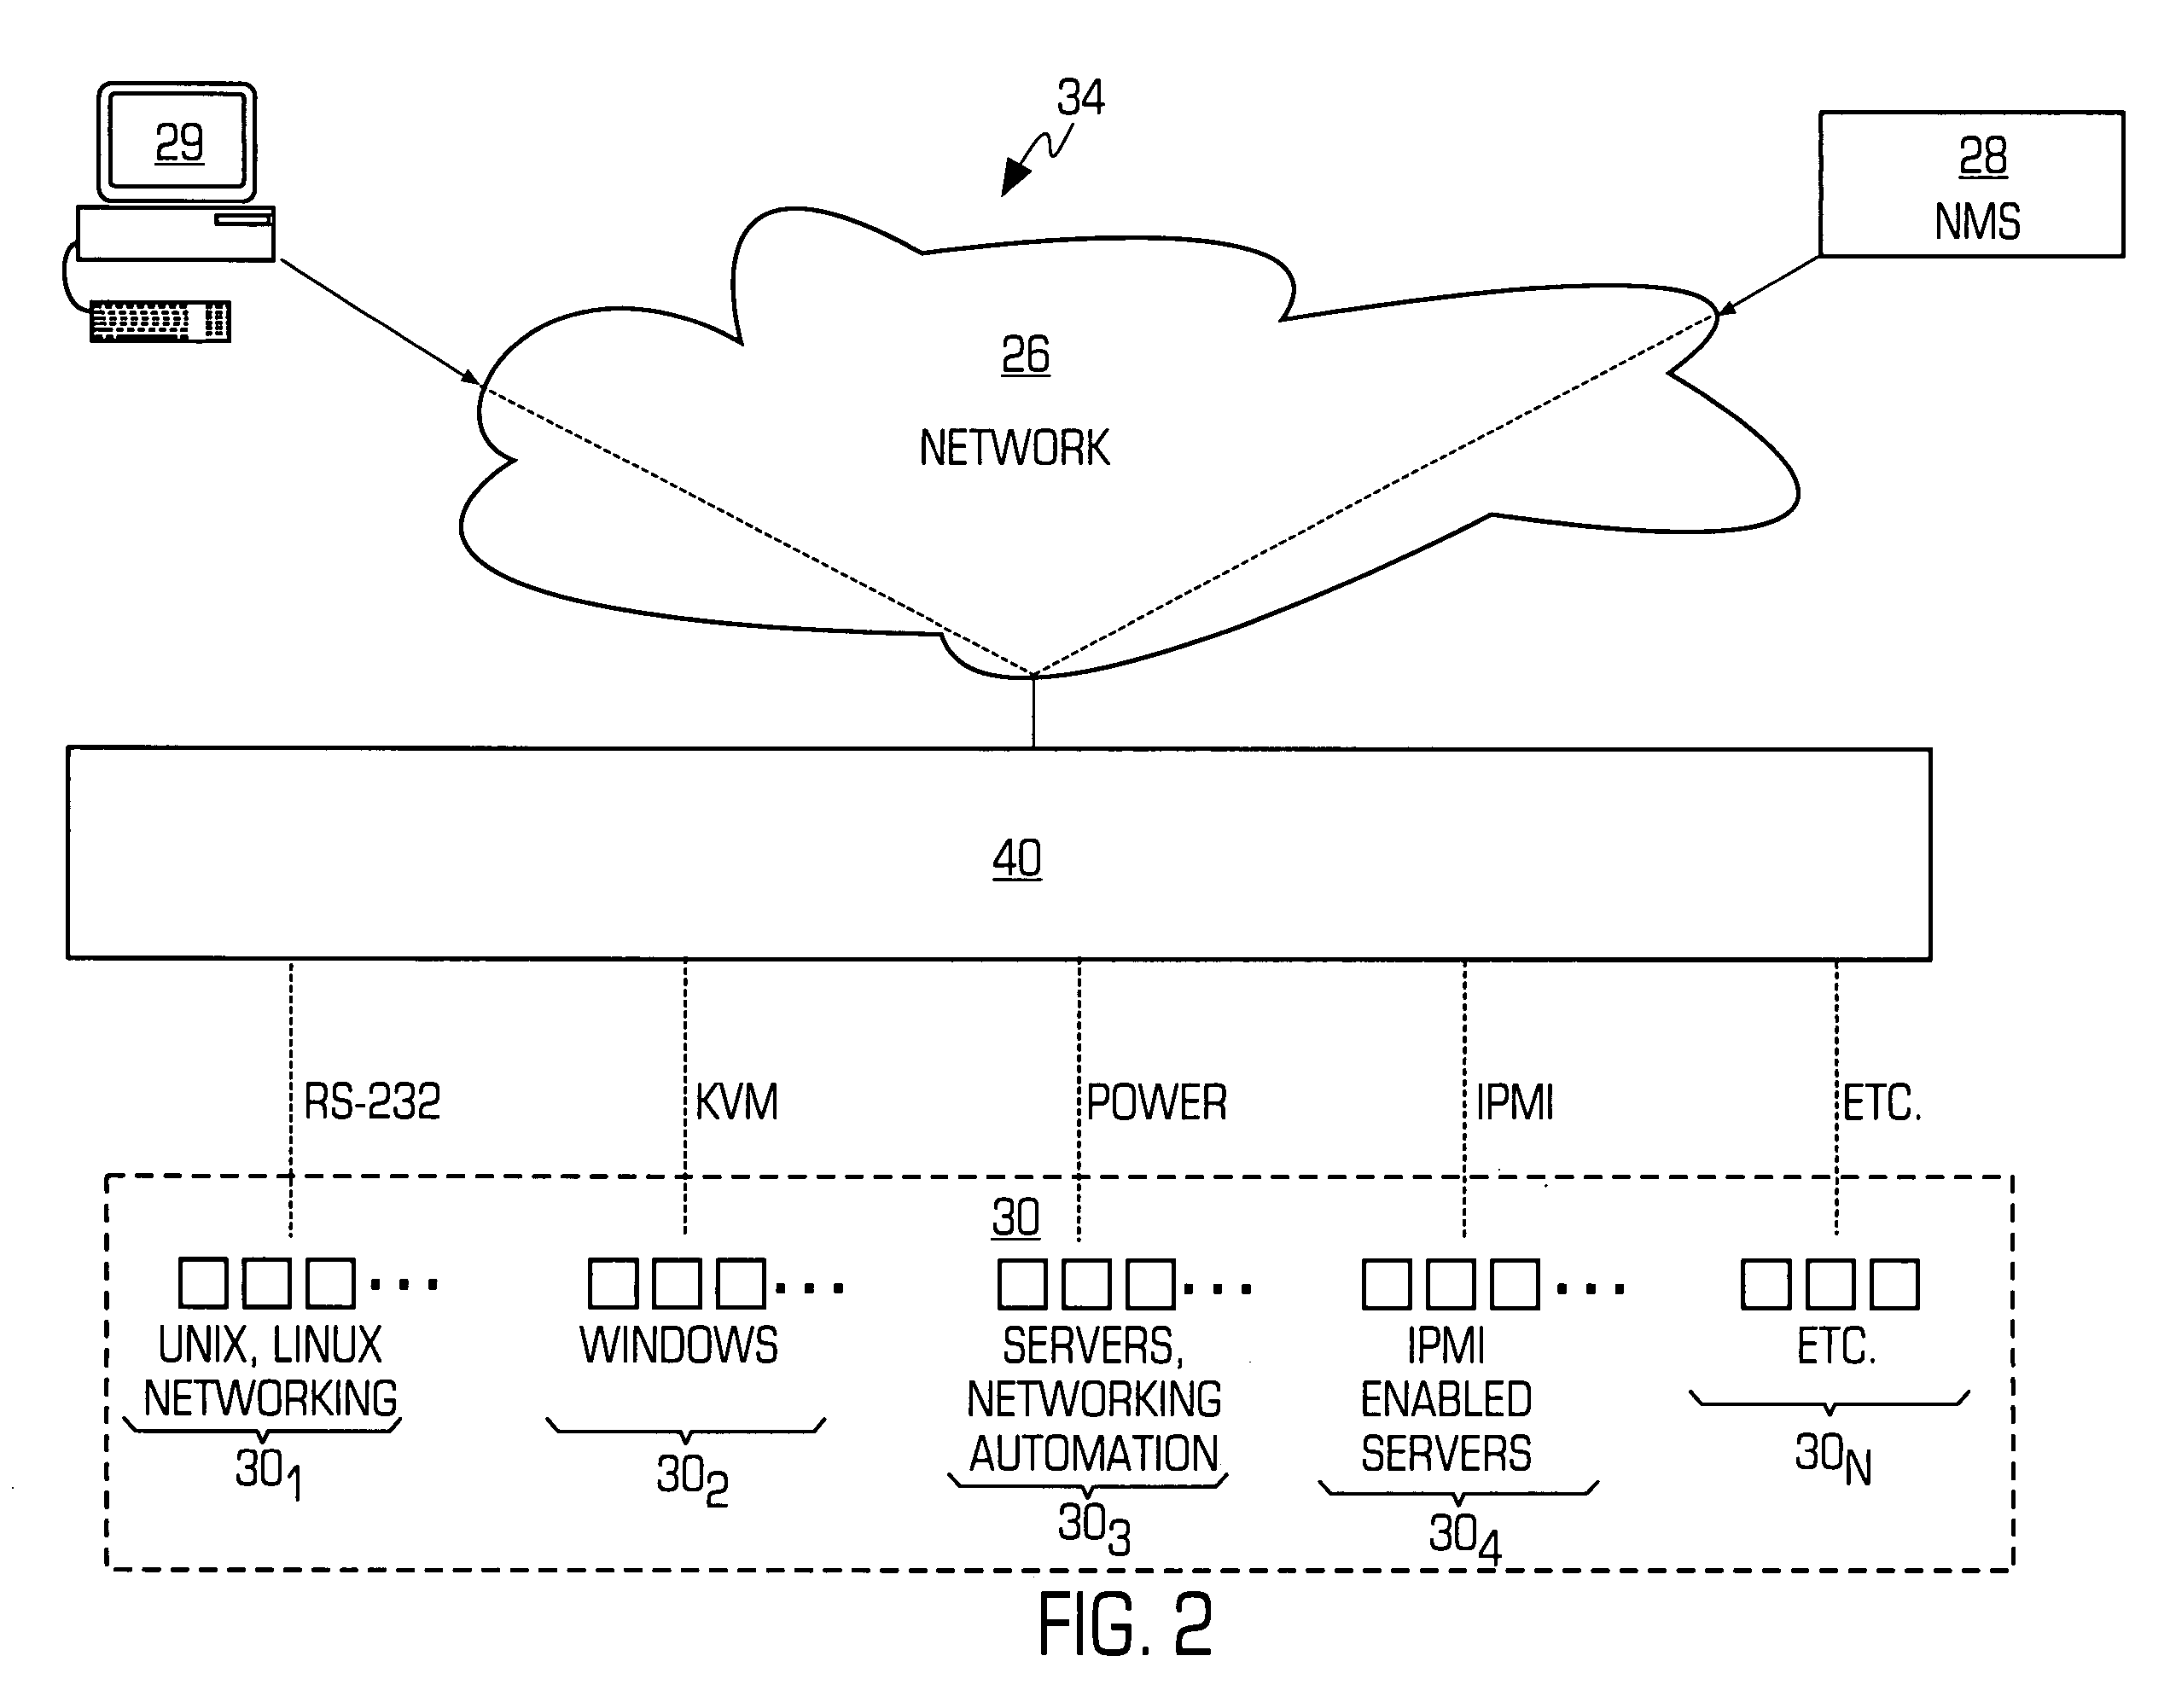 System and method for consolidating, securing and automating out-of-band access to nodes in a data network